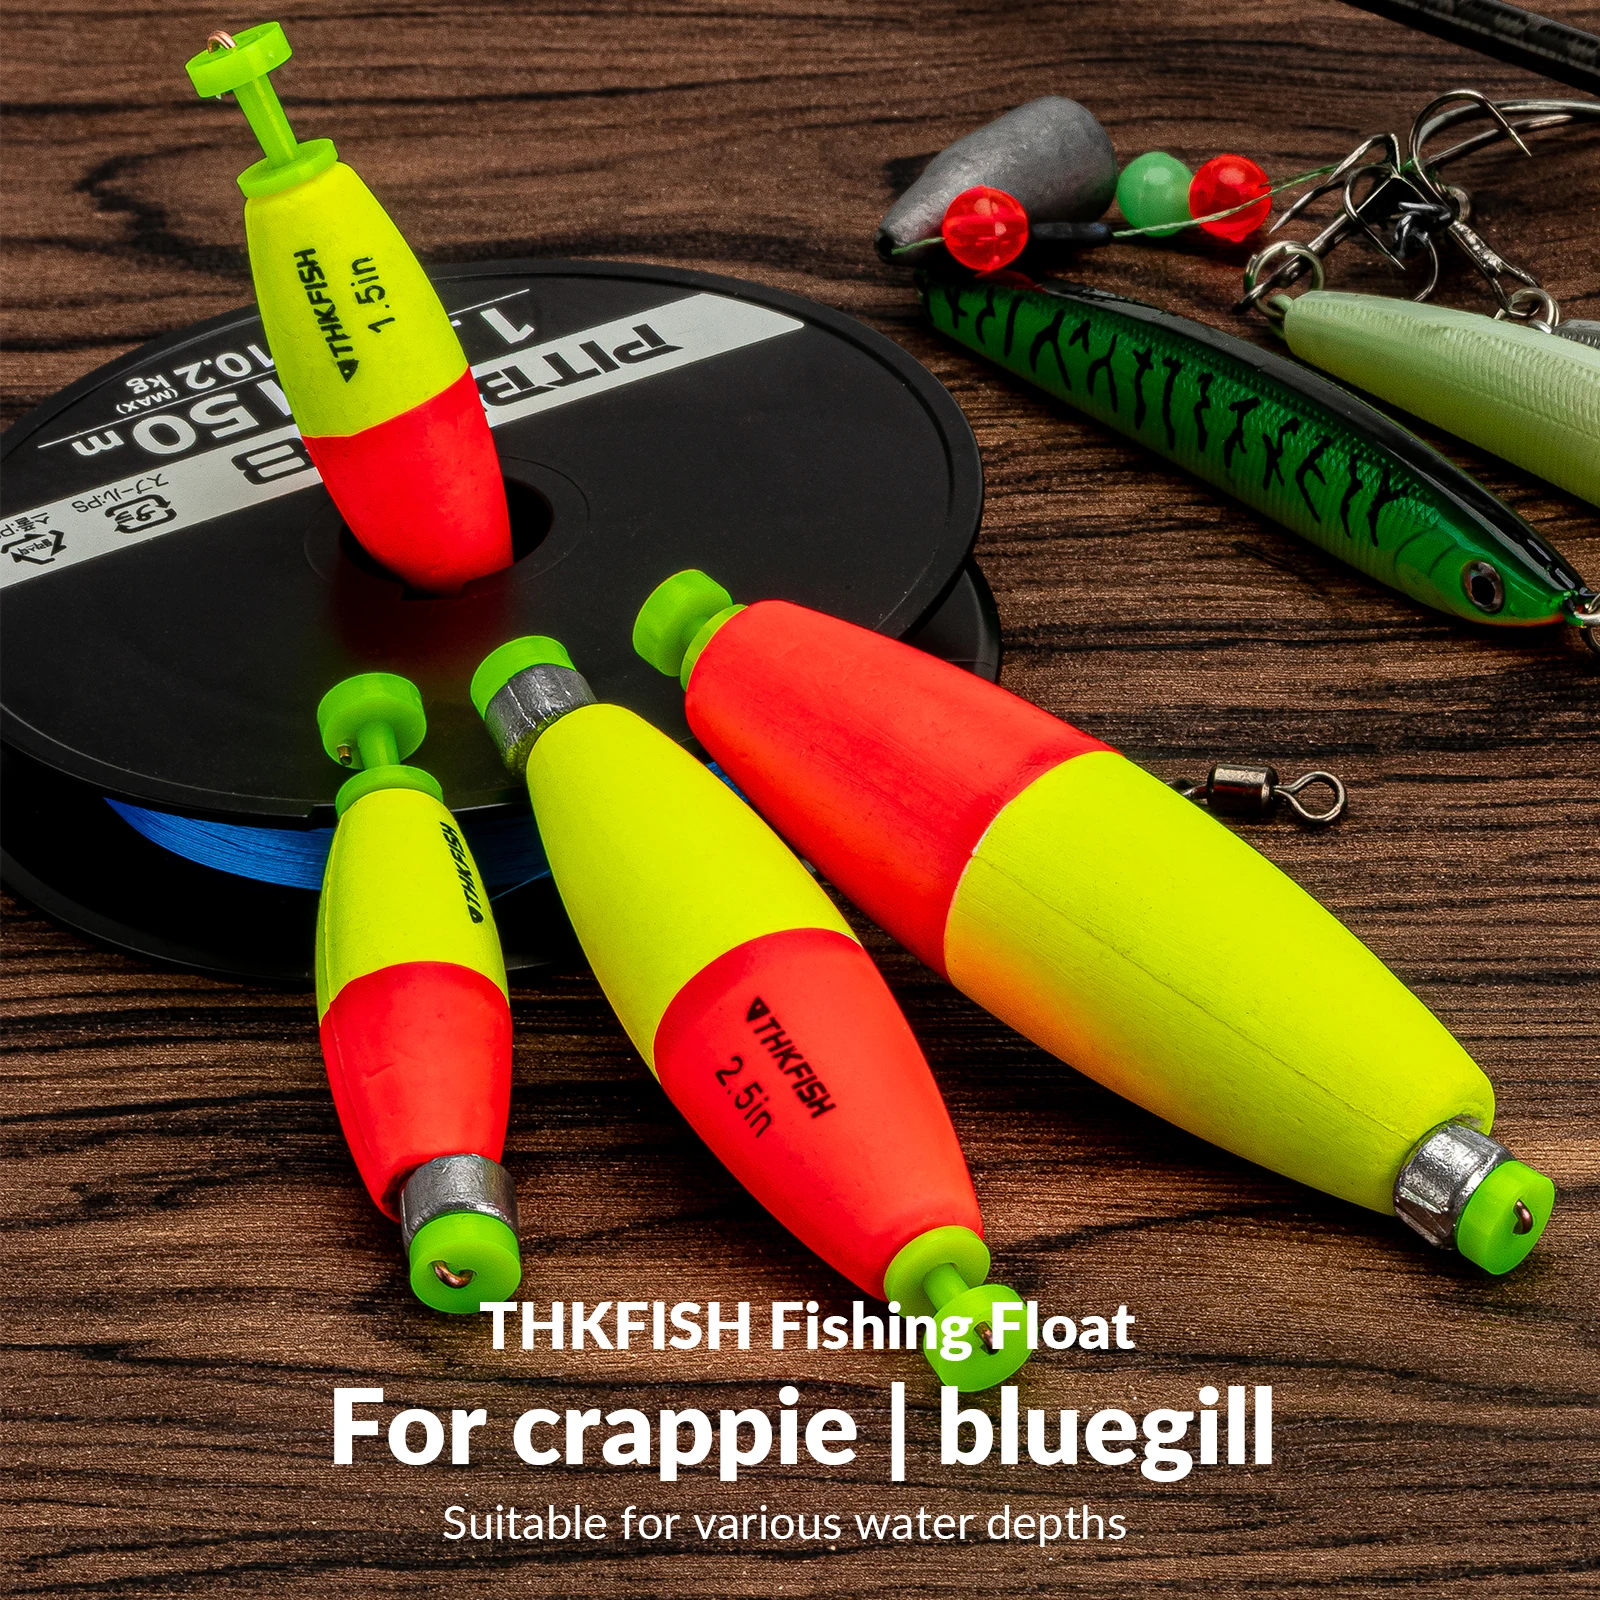 https://ae01.alicdn.com/kf/H69f8f0d9214c4eeea509adbf2812ea4bA/Thkfish-Fishing-Float-Bobber-EVA-Form-Float-Weighted-Snag-On-Cigar-Float-for-Crappie-Fishing-Tackle.jpg